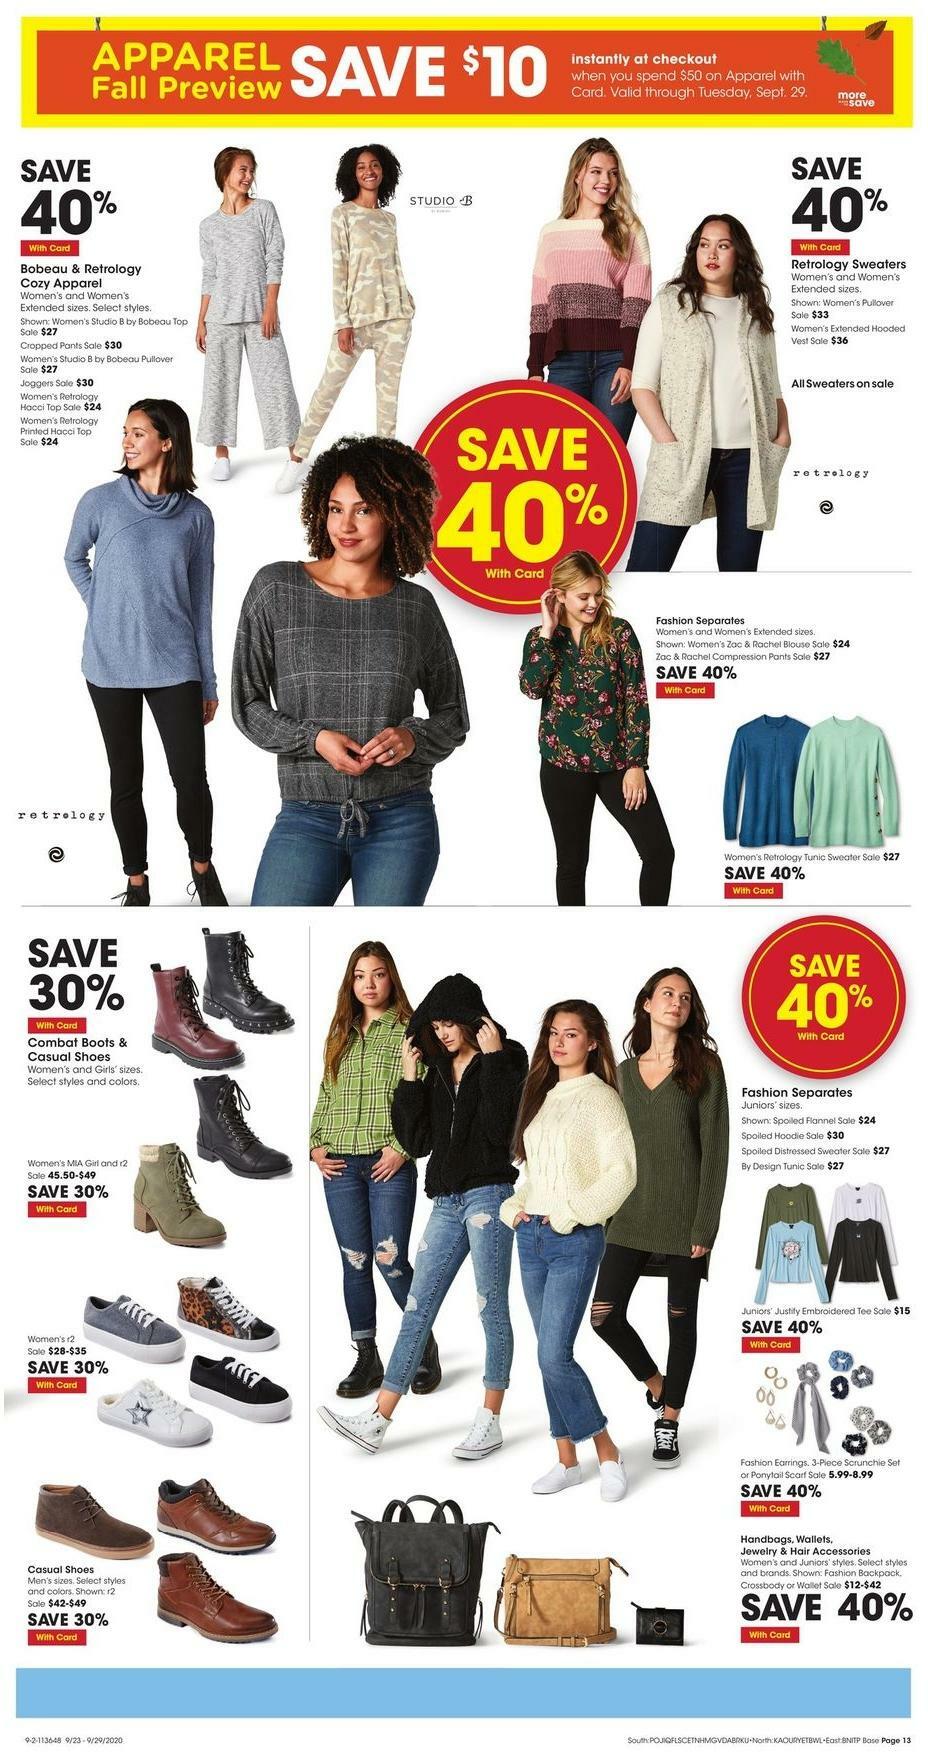 Fred Meyer Weekly Ad from September 23